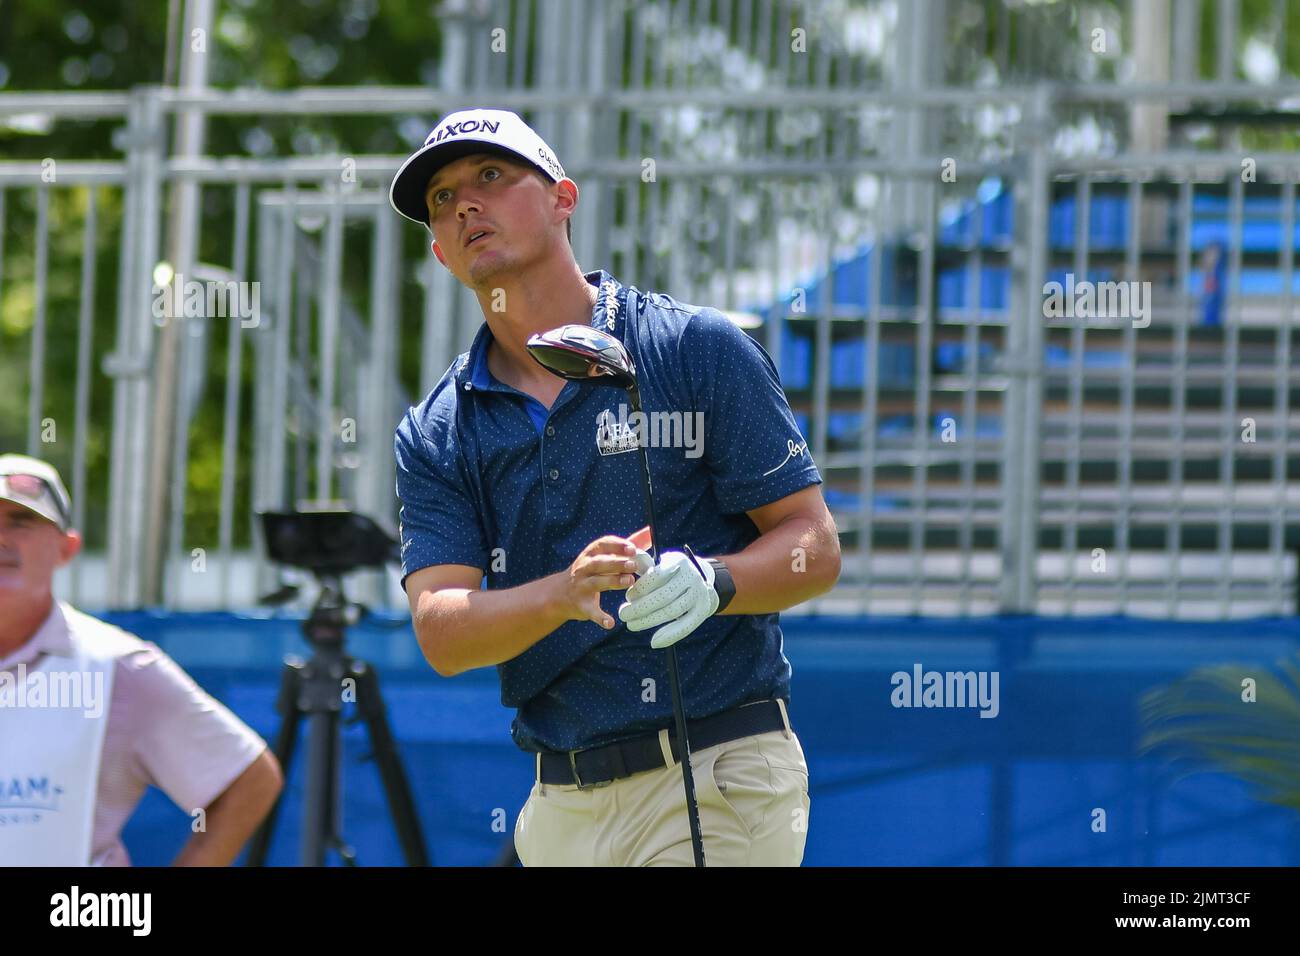 August 7, 2022 Max McGreevy watches his drive on the tenth hole during the final round of the Wyndham Championship at Sedgefield Country Club in Greensboro, North Carolina